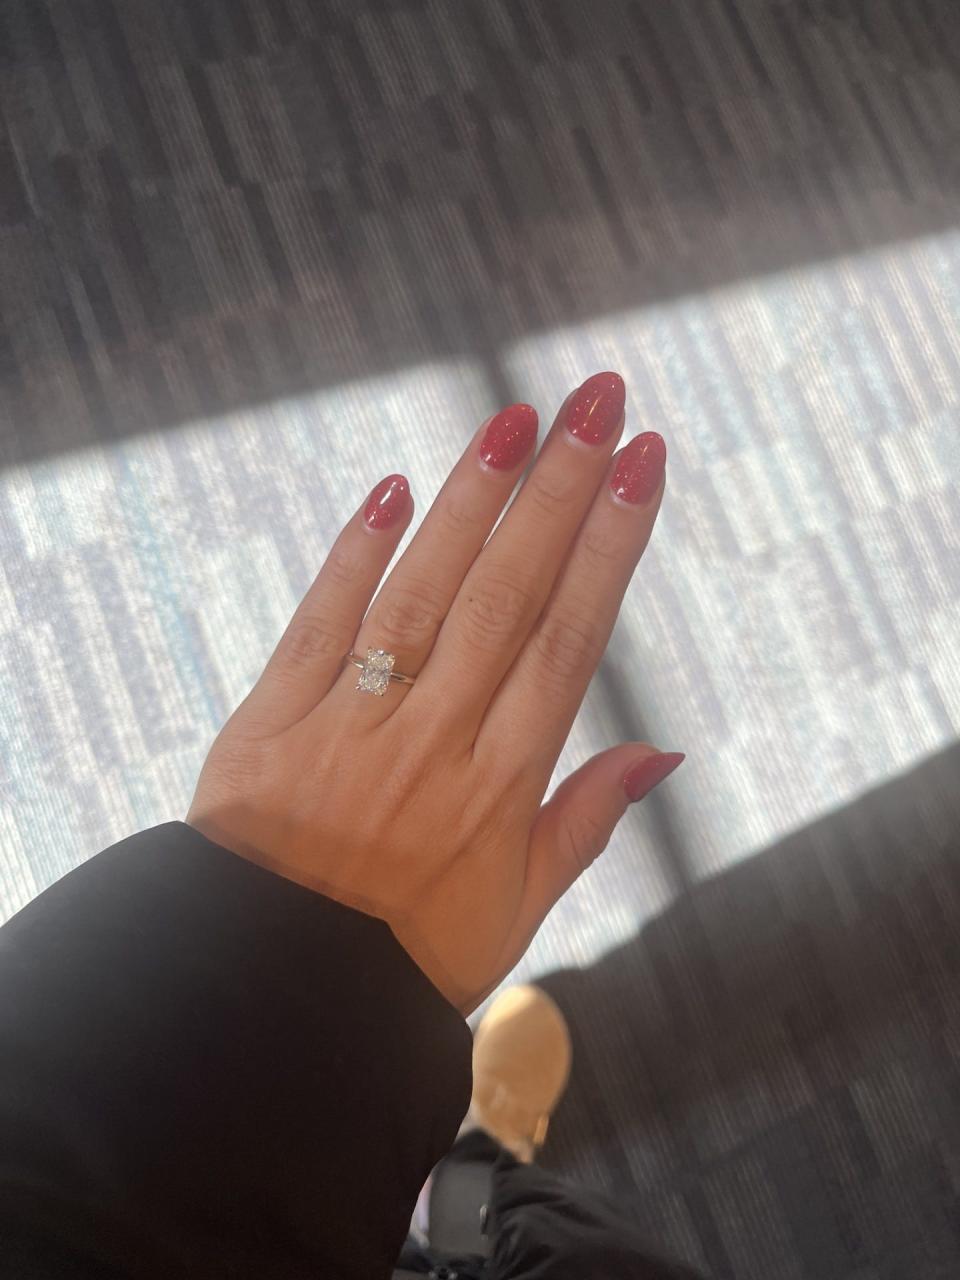 Vazquez has sparkly pink nails as she wears her diamond engagement ring